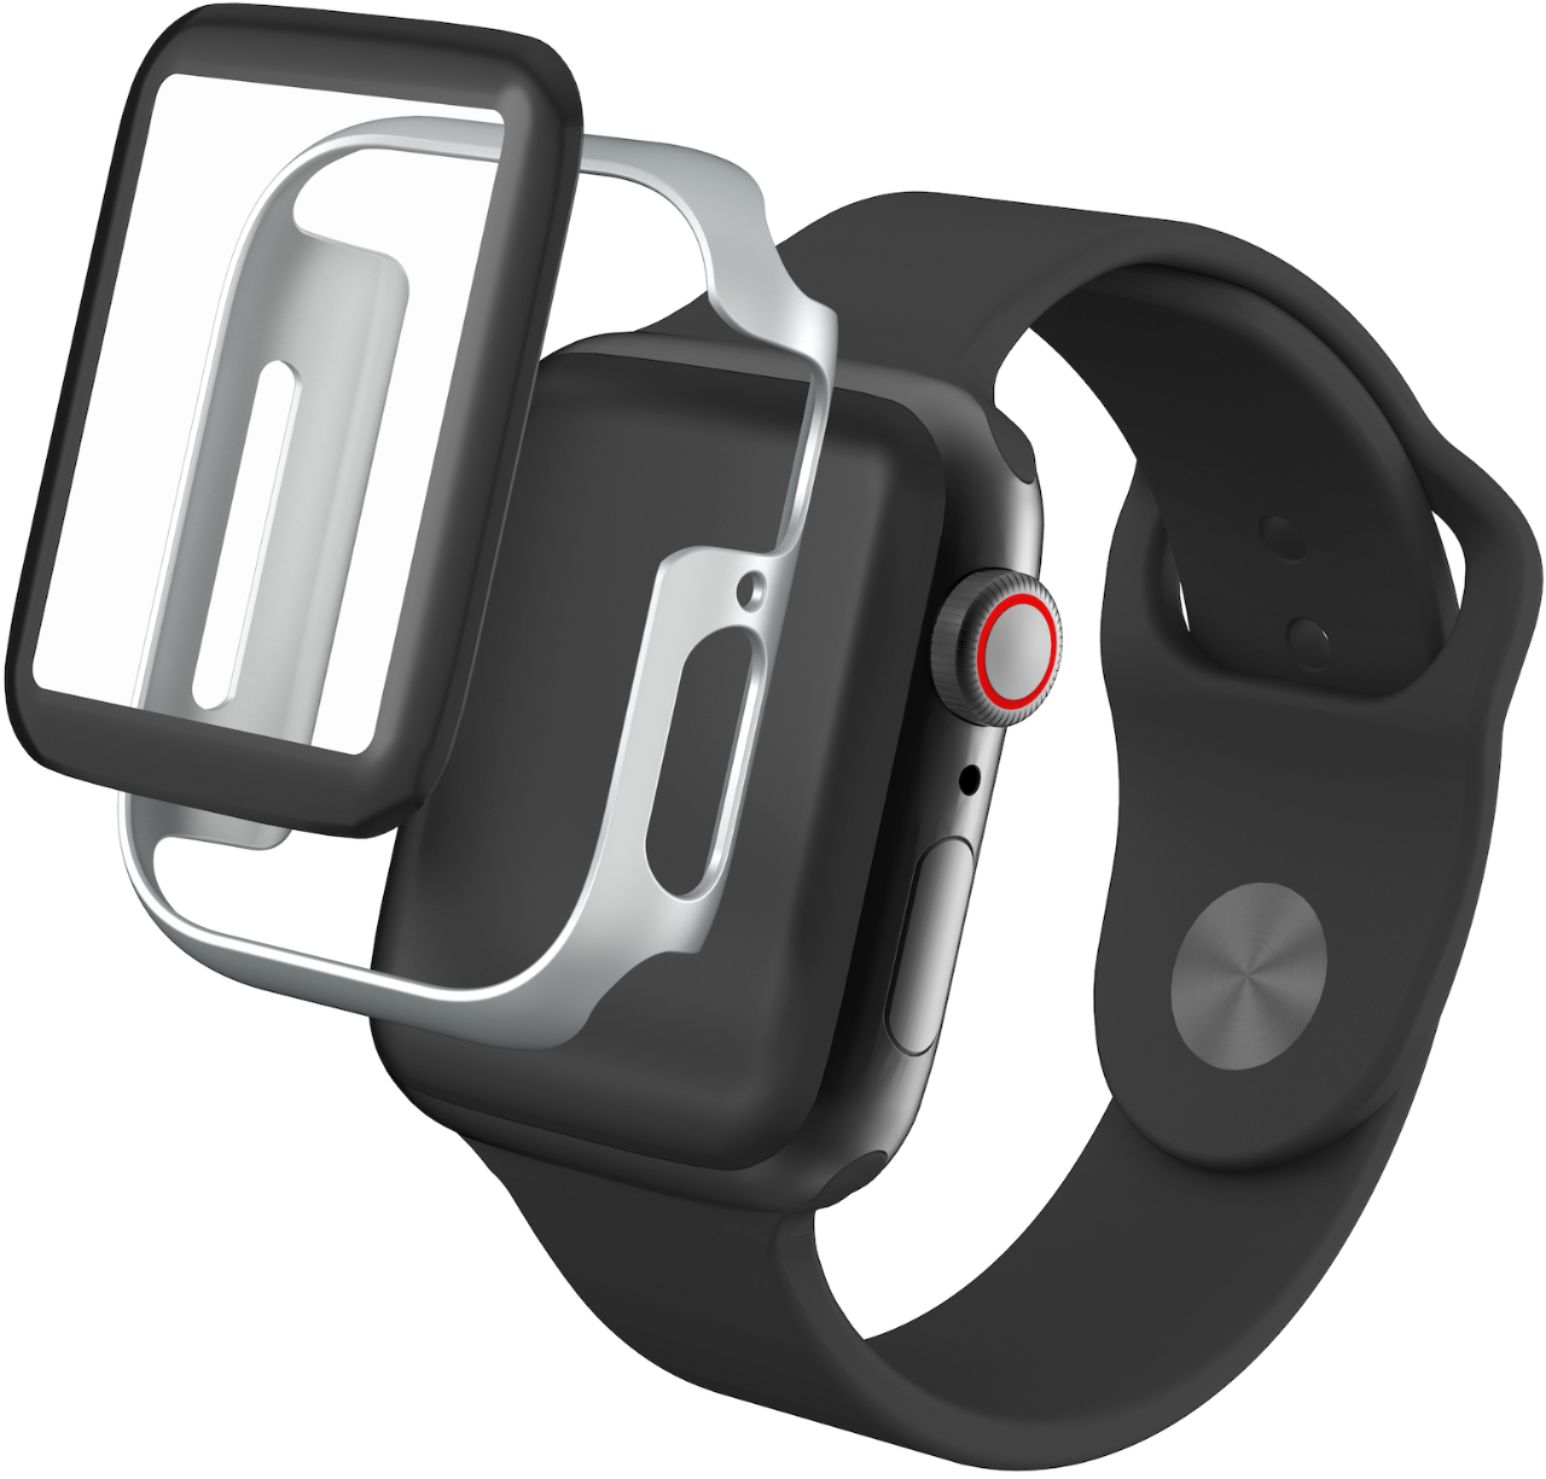 Angle View: ZAGG - InvisibleShield GlassFusion 360 Screen Protector for Apple Watch Series 4, Series 5, SE, Series 6 44mm - Silver